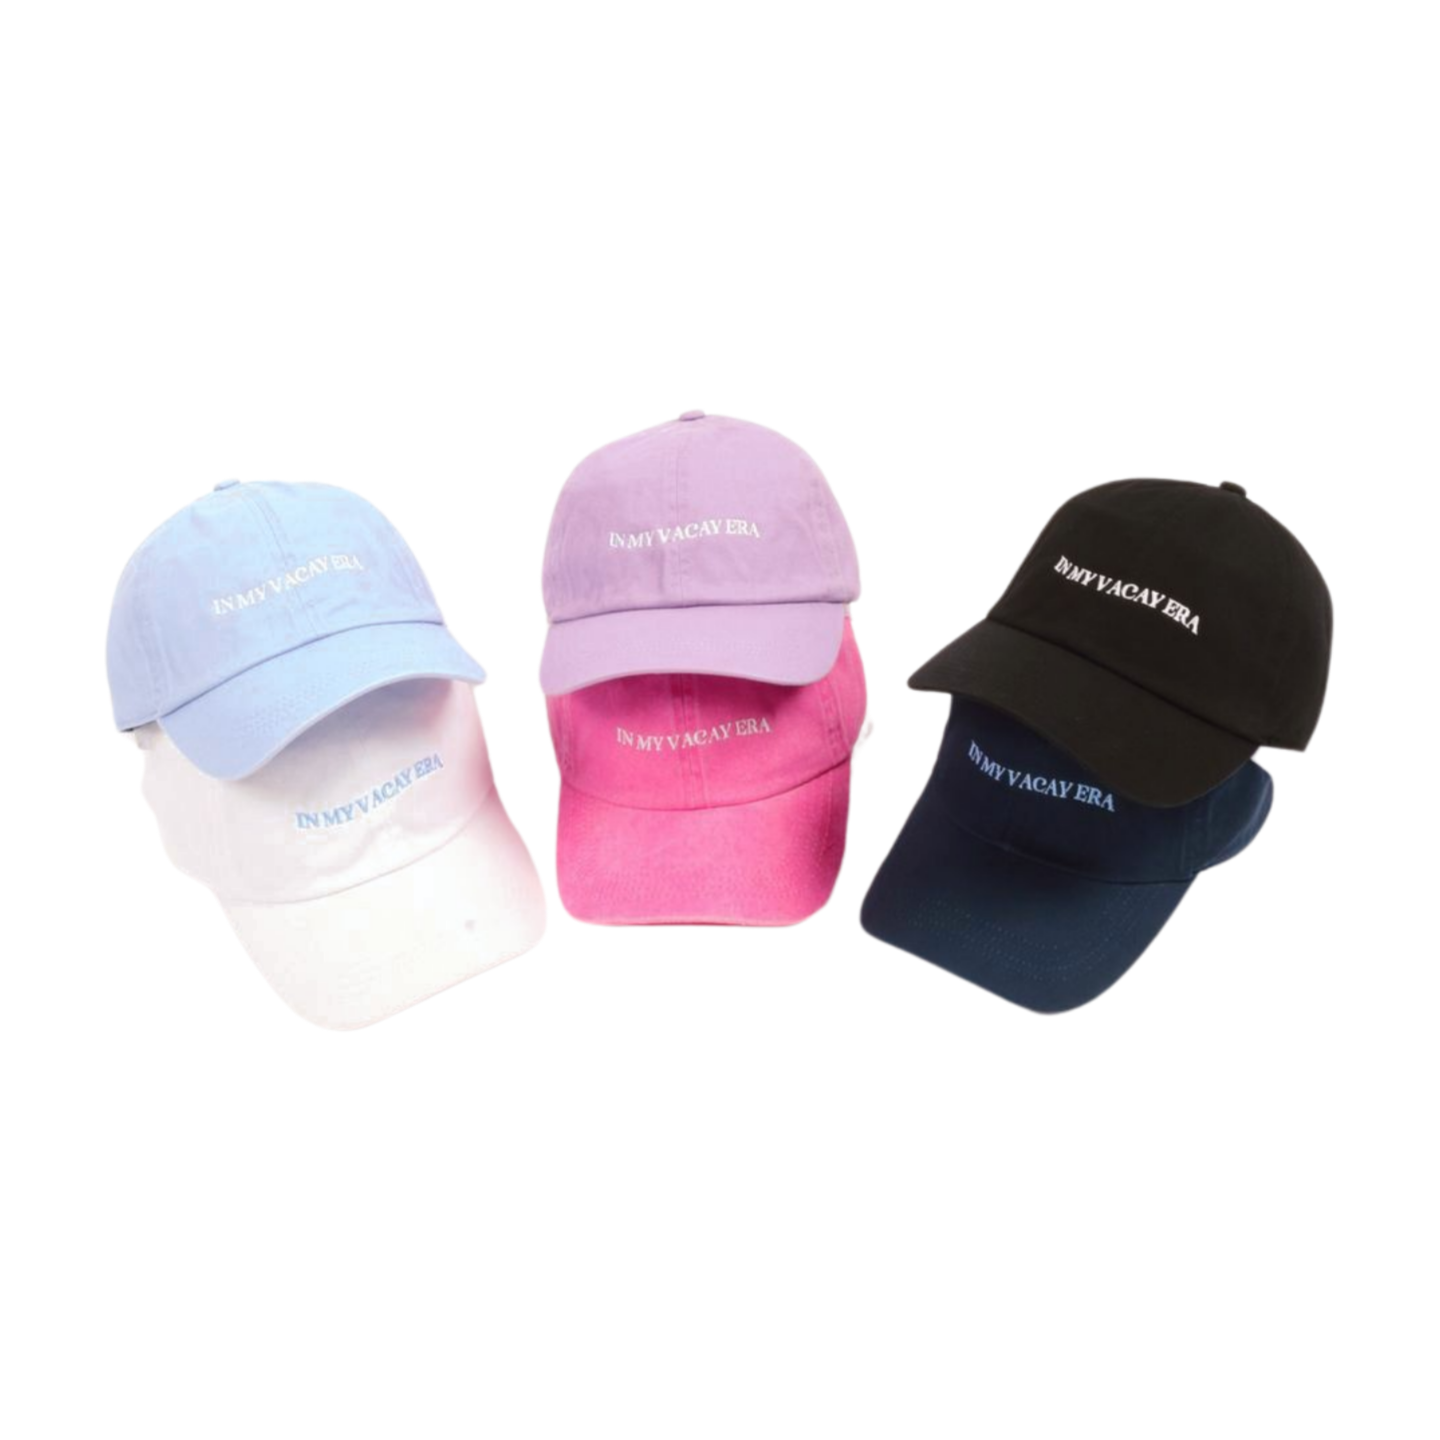 LCAP3437 - "IN MY VACAY ERA" EMBROIDERED BASEBALL CAP